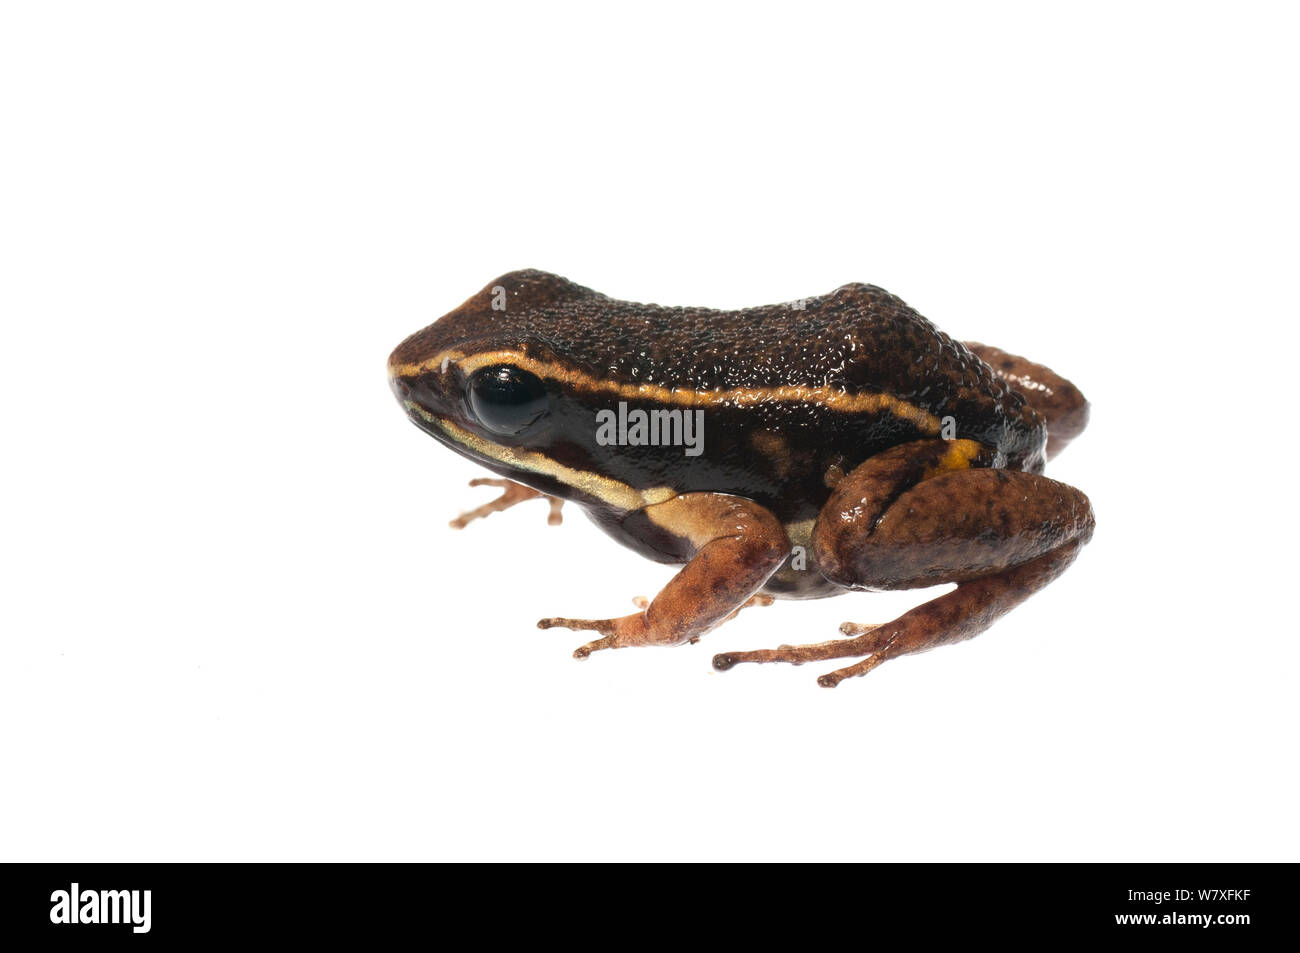 Brilliant thighed poison frog (Allobates femoralis), Berbice River, Guyana, September. Meetyourneighbours.net project. Stock Photo